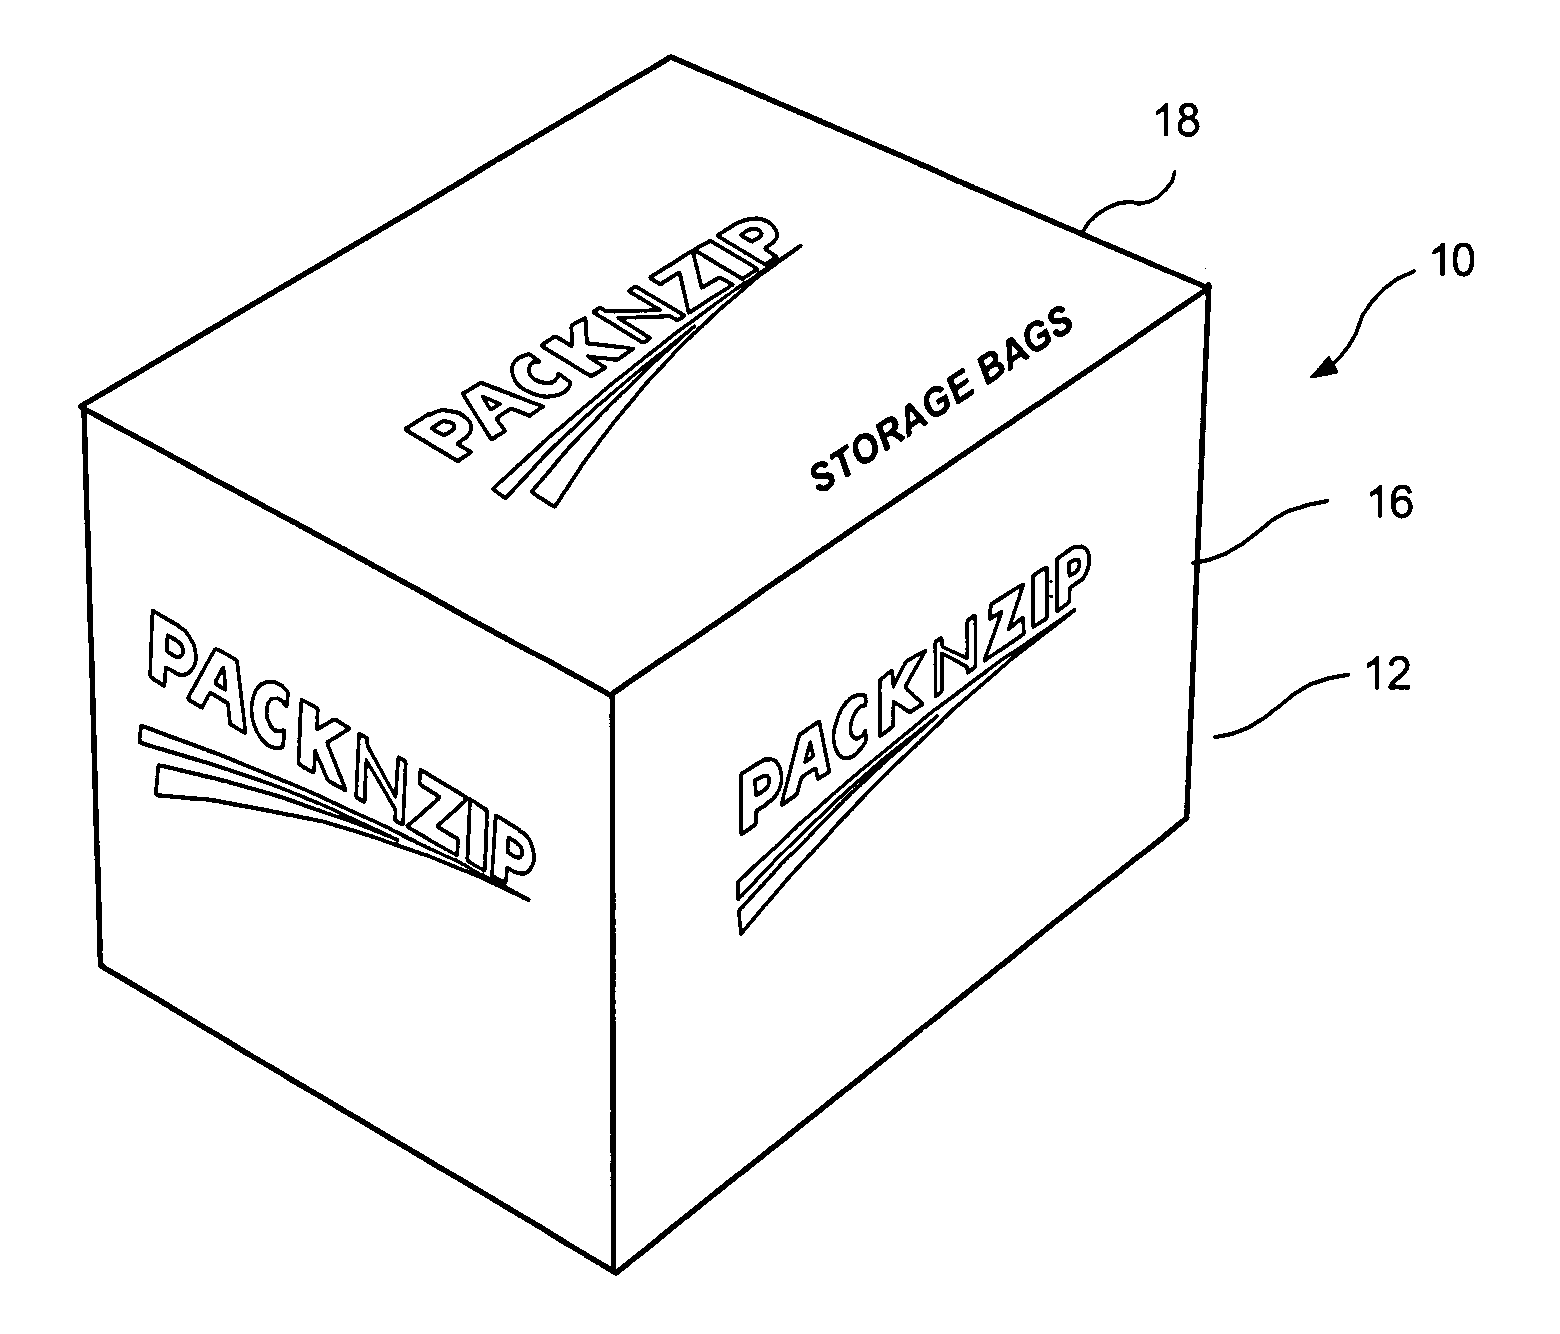 Packing method for soft packages